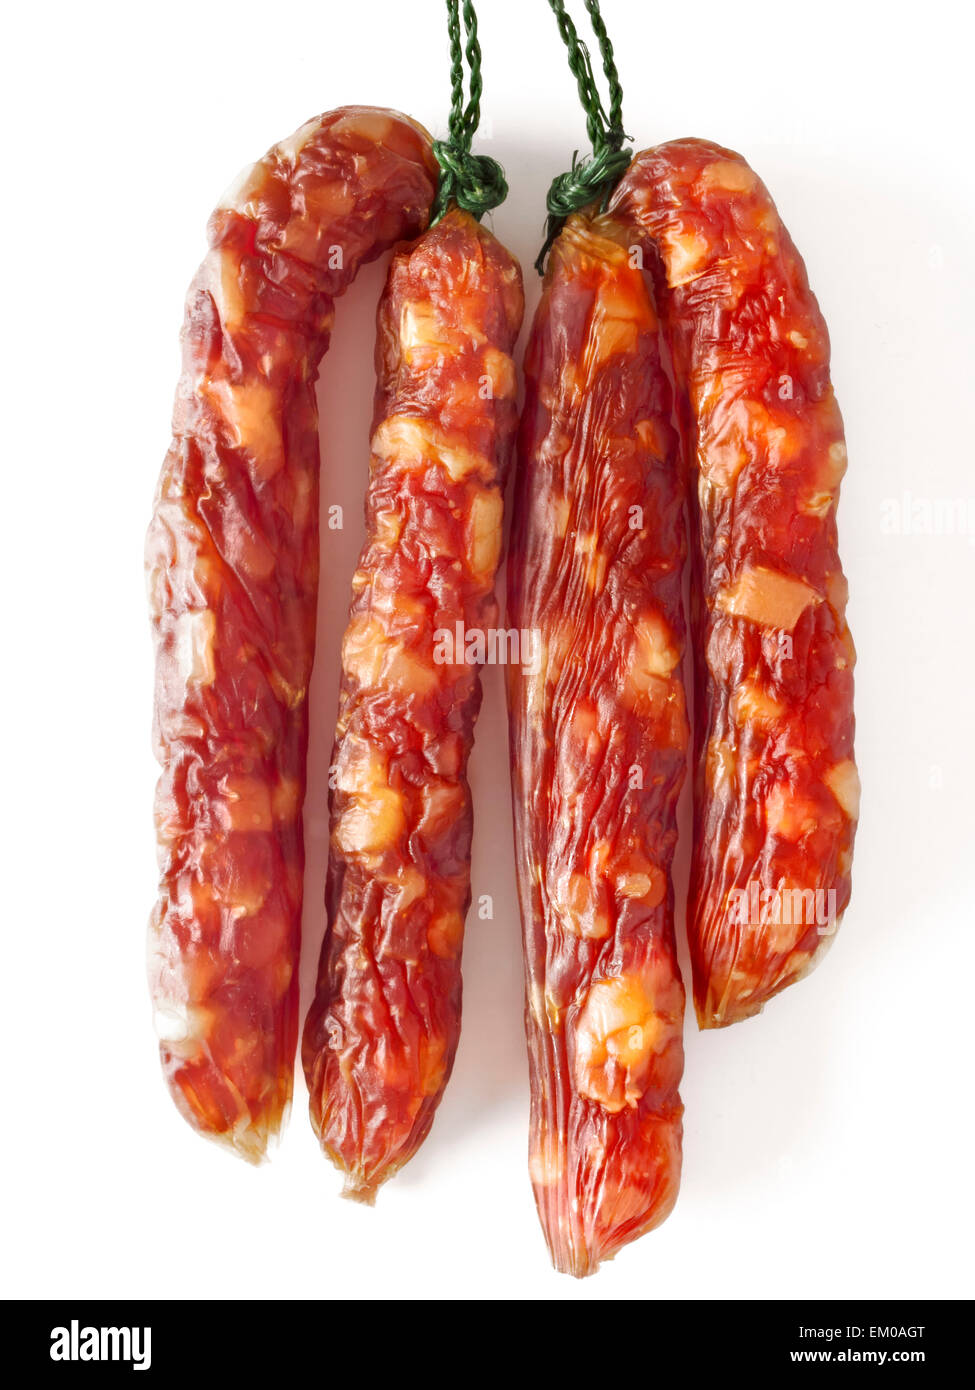 fatty chinese pork sausages Stock Photo